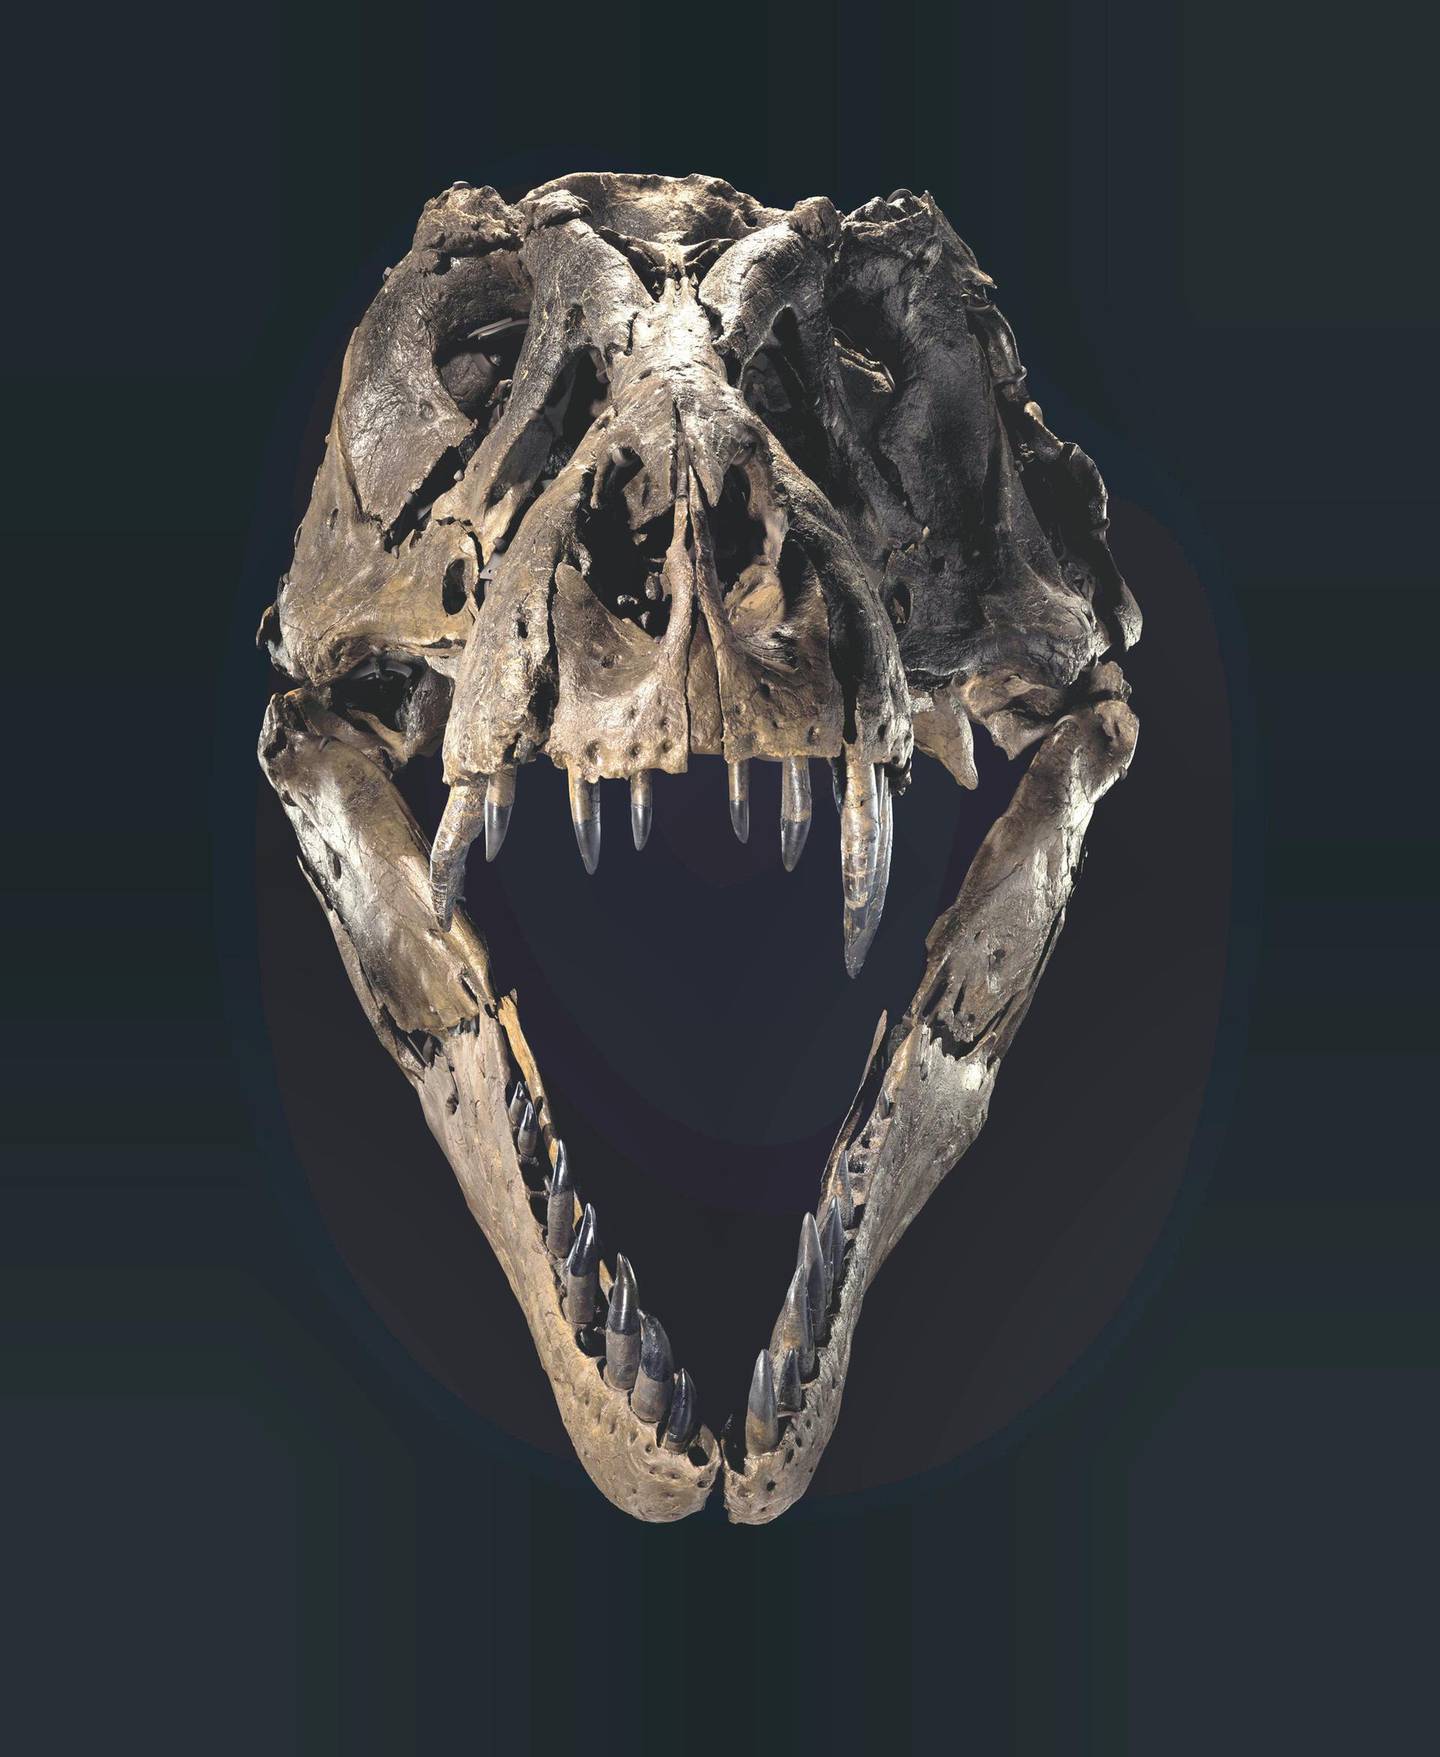 Stan's skull is one of the most complete T-rex examples, and could hold 58 functioning teeth. Photo: Christie's